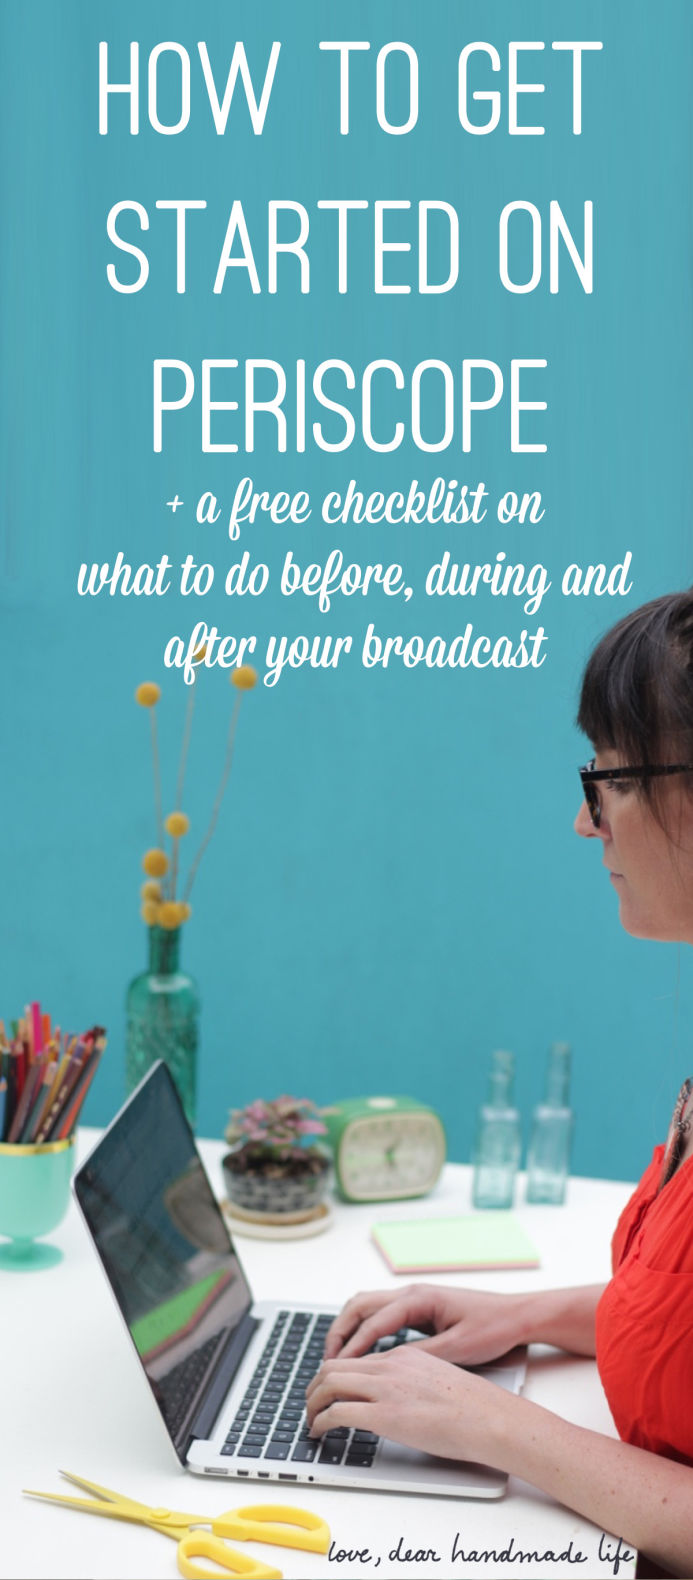 How to get started on Periscope from Dear Handmade Life